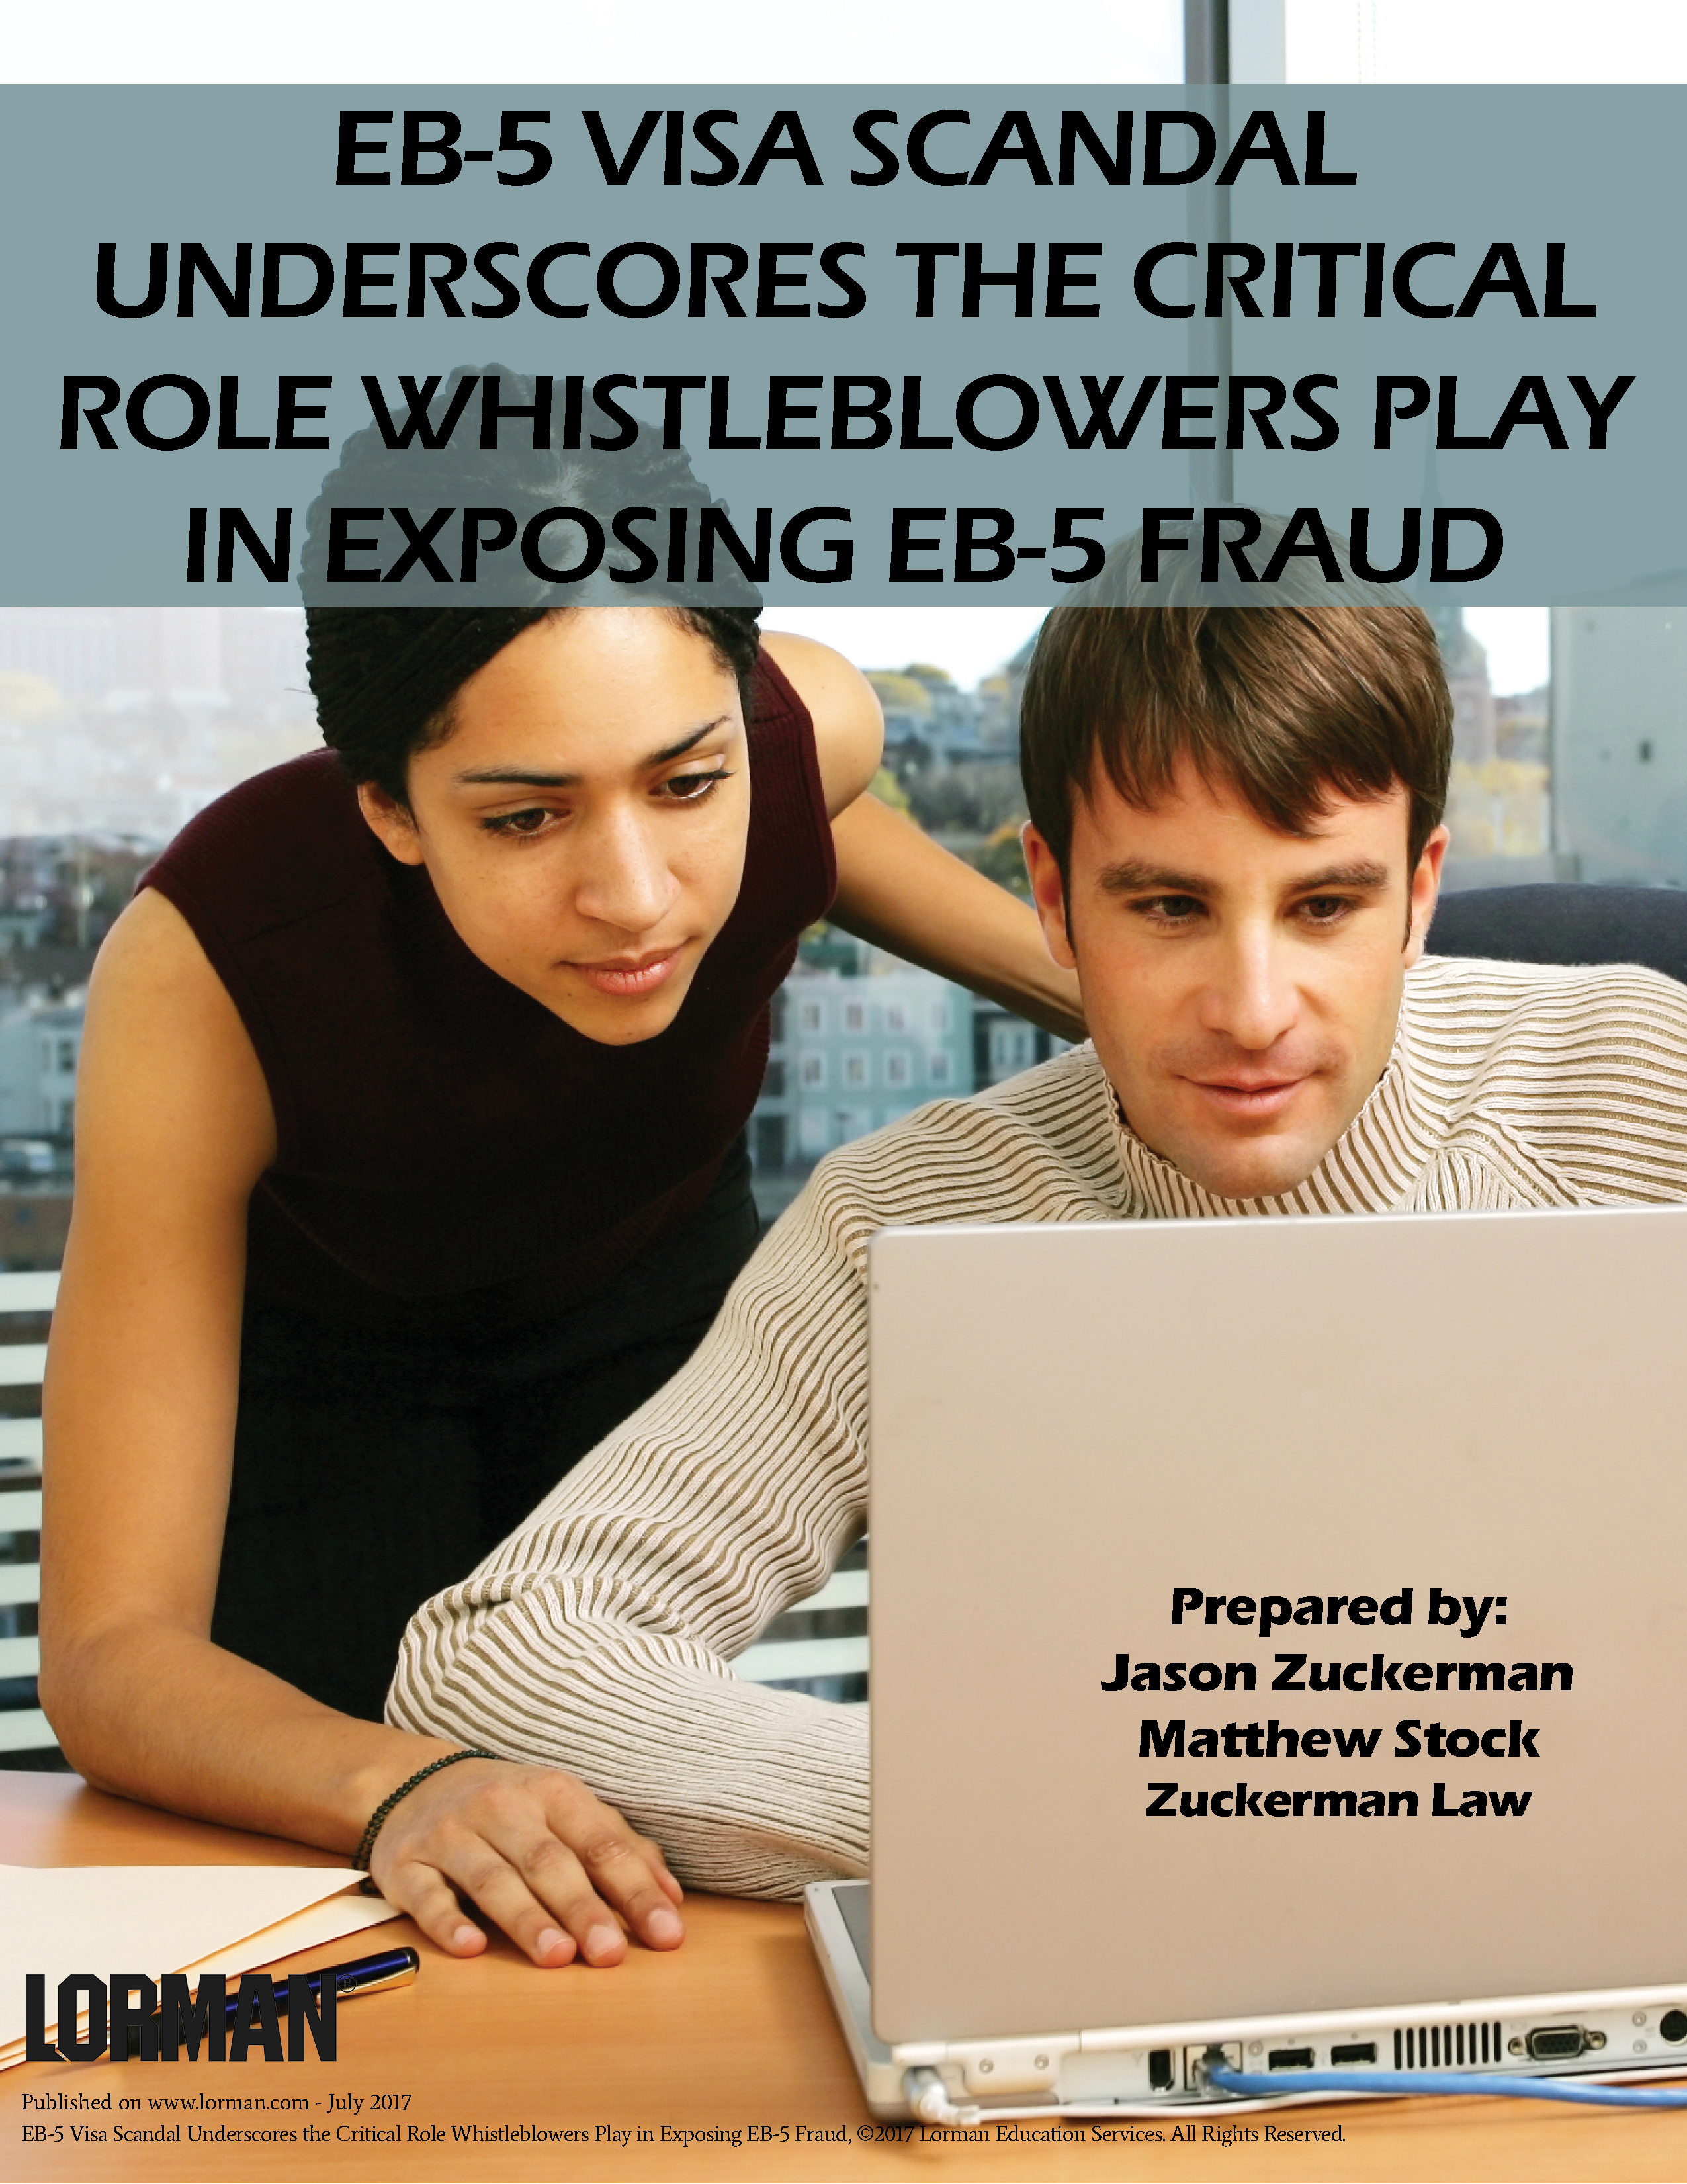 EB-5 Visa Scandal Underscores the Critical Role Whistleblowers Play in Exposing EB-5 Fraud